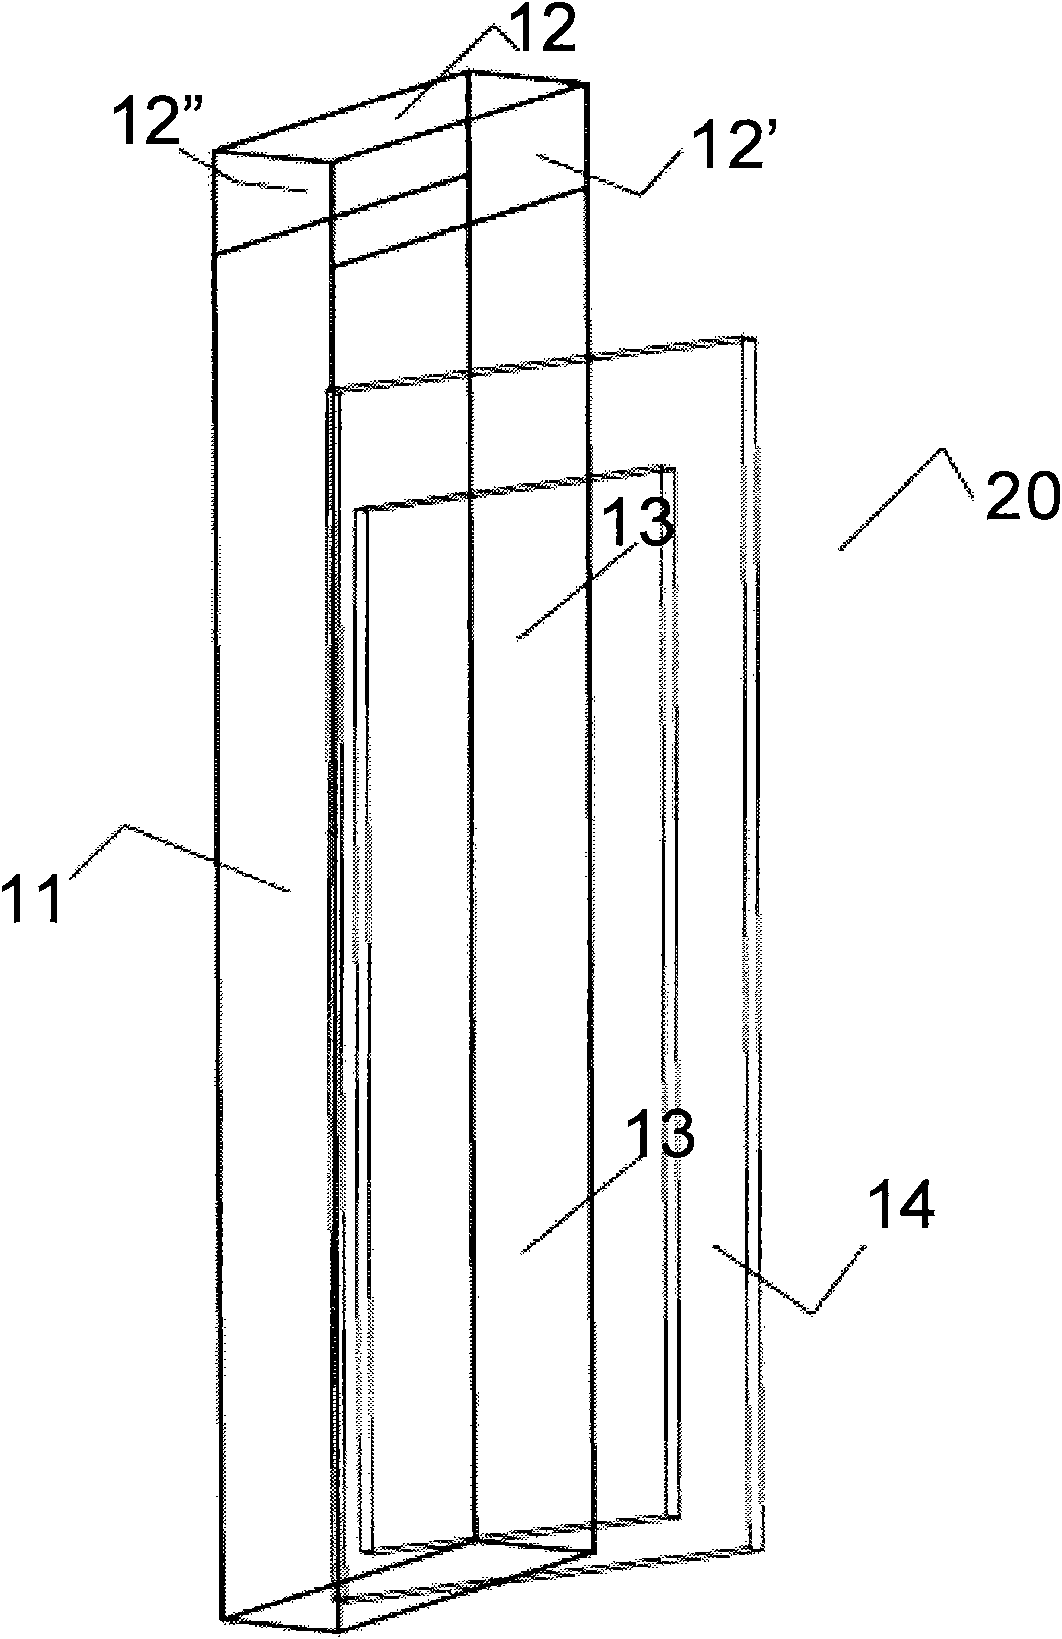 Heat removal device of communication electrical appliance